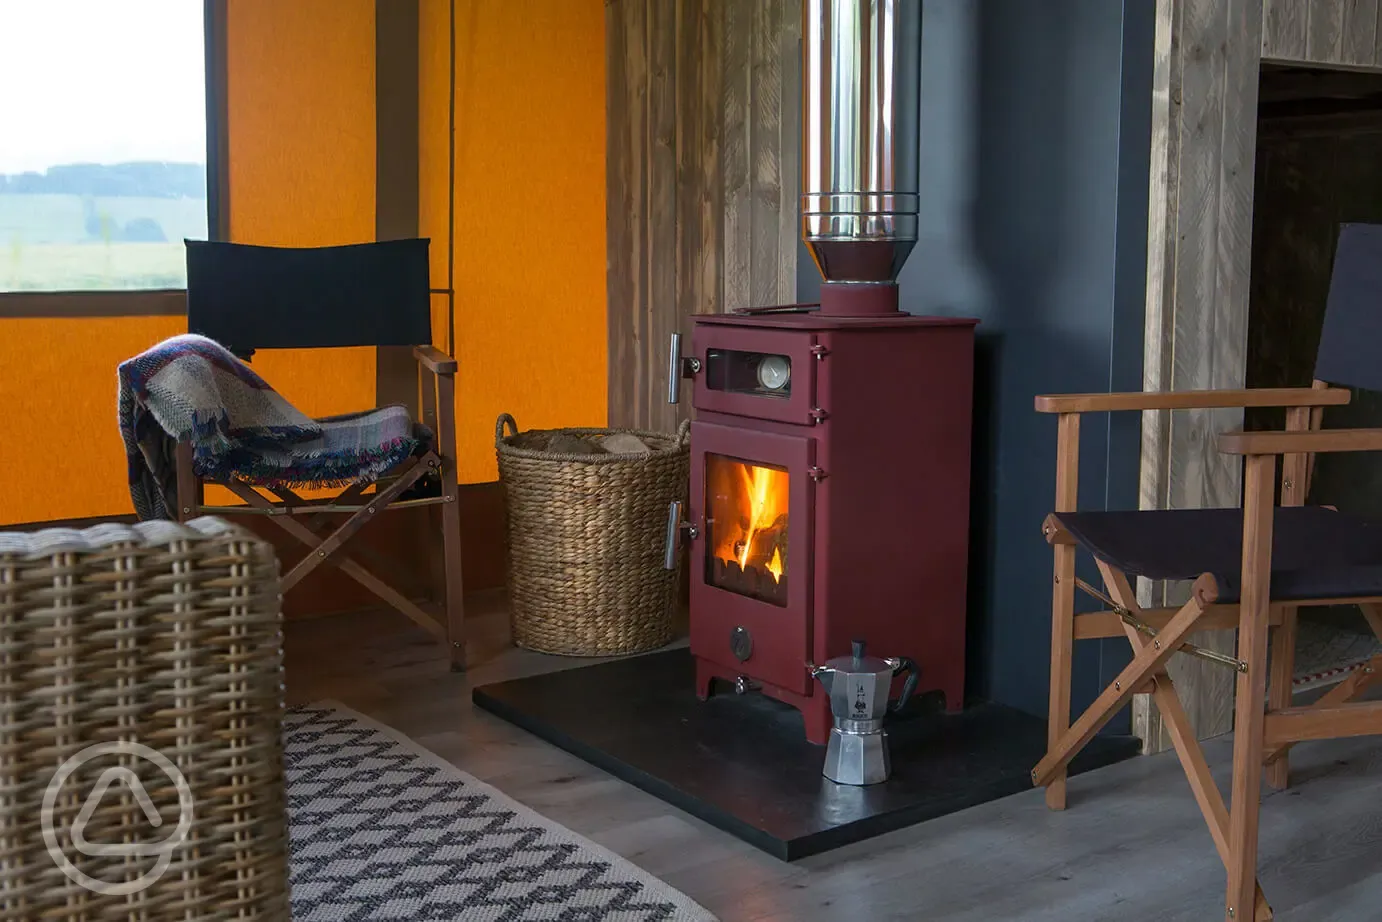 Sandpipers wood-burning stove